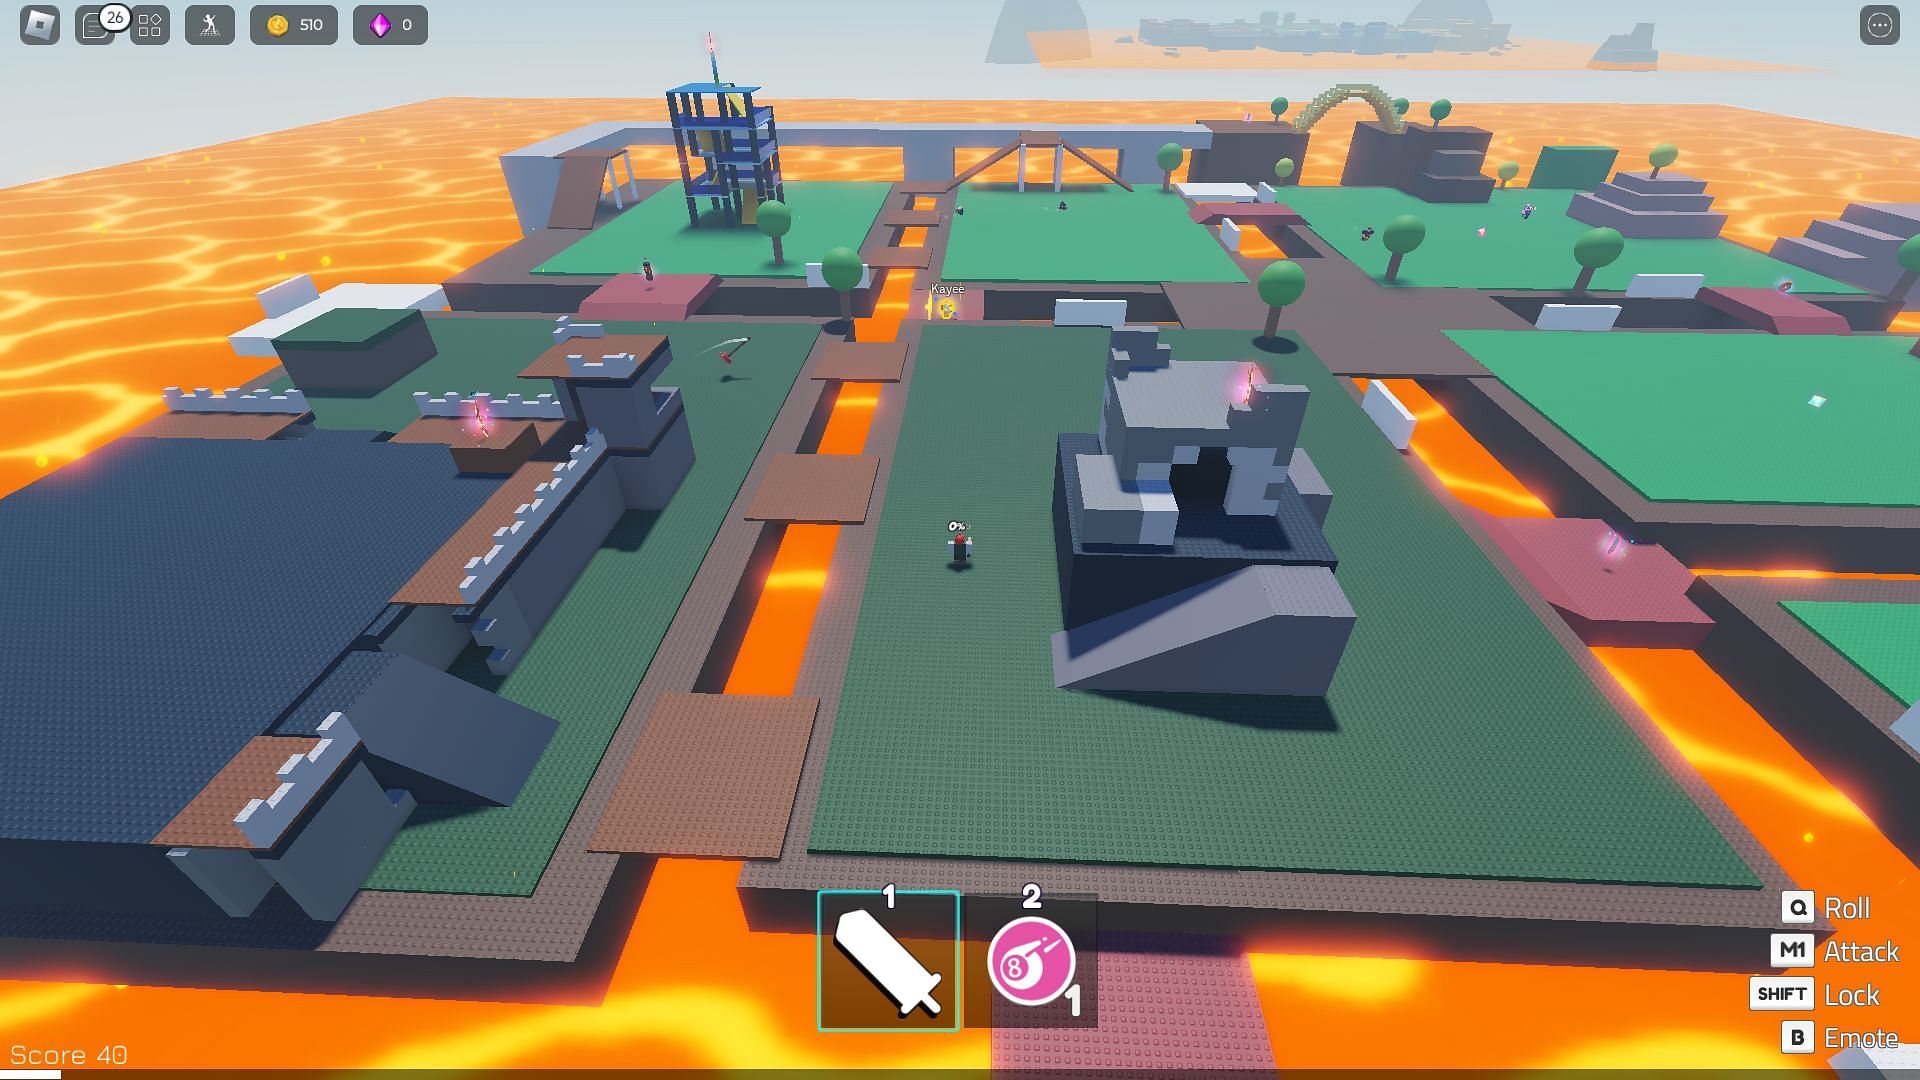 Battles take place on a large map (Image via Roblox)